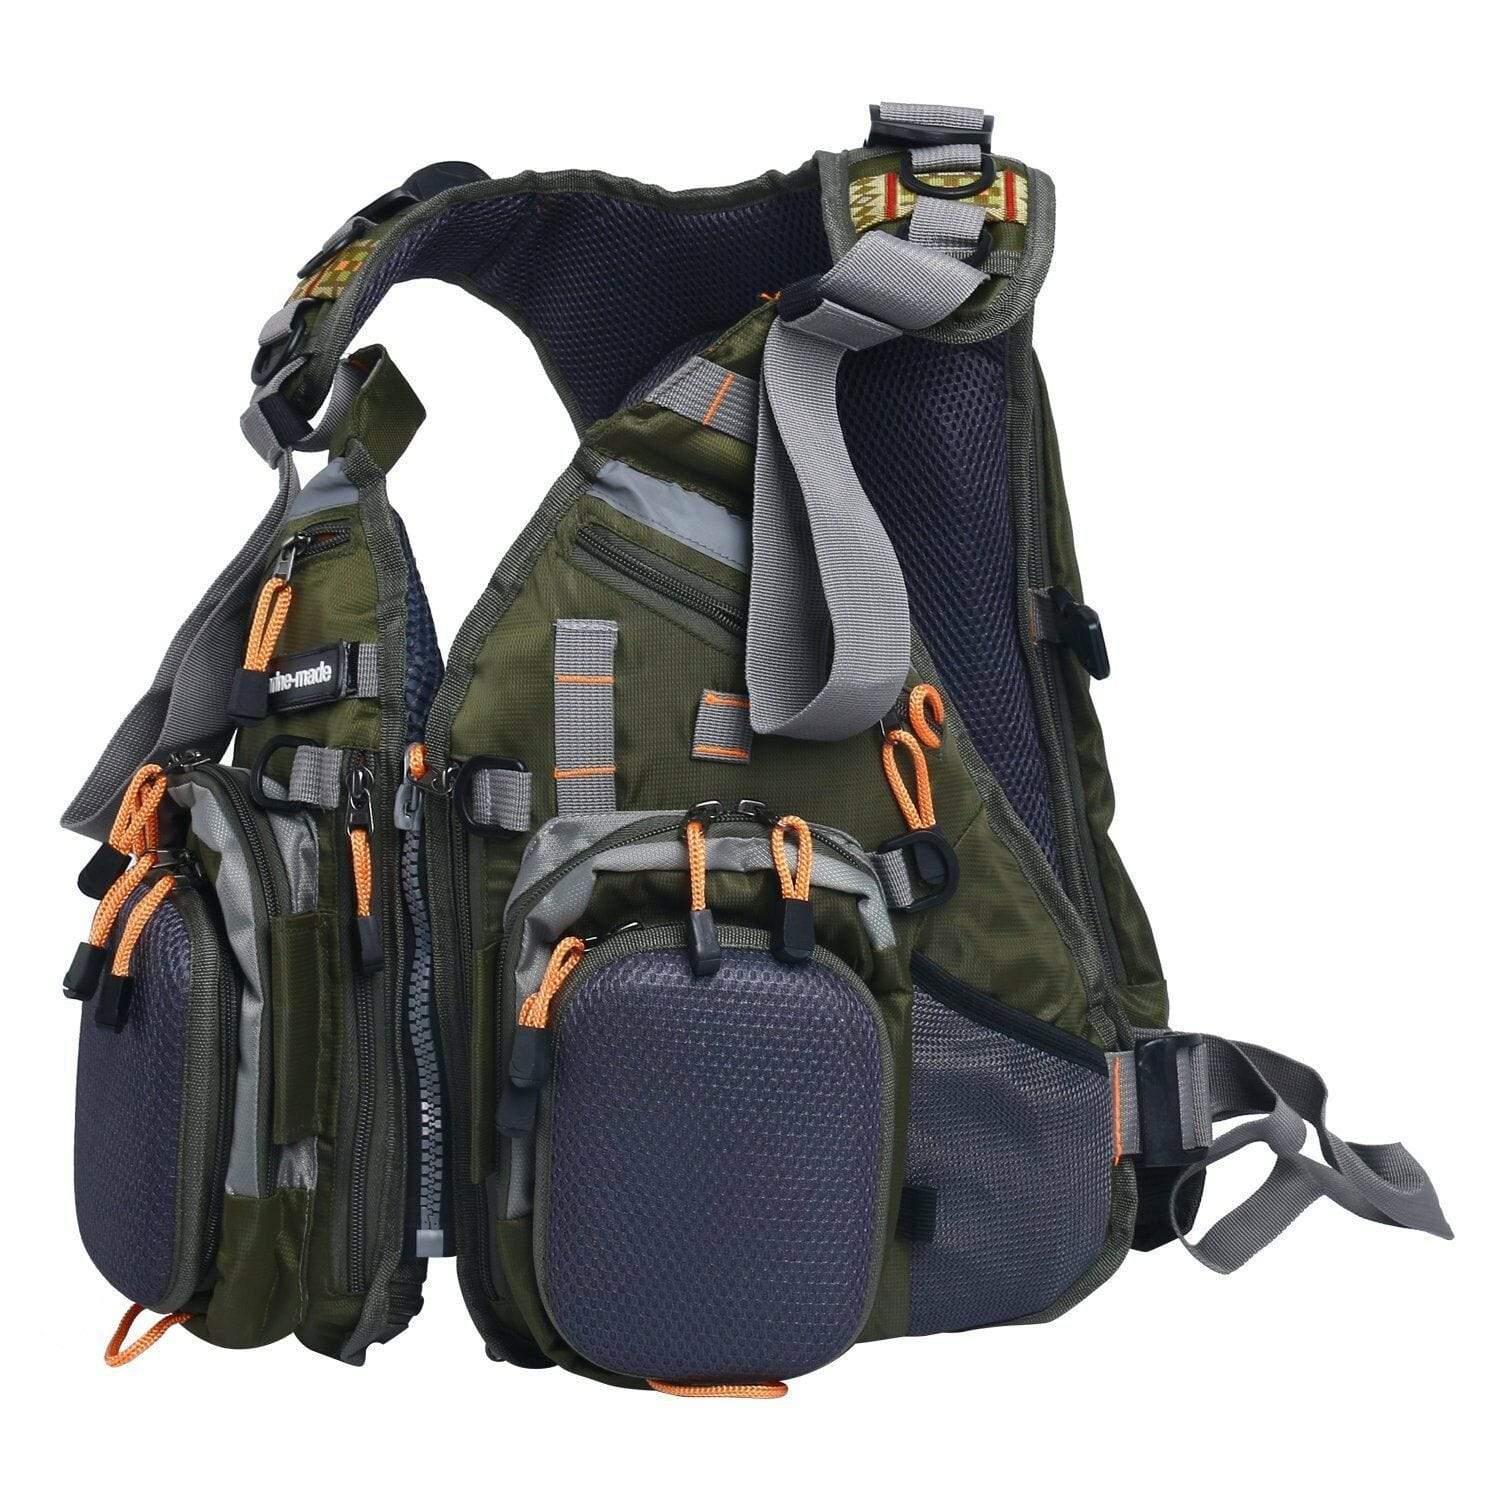 FishingFriend Nomad Fly Fishing and Hiking Mesh Backpack Vest